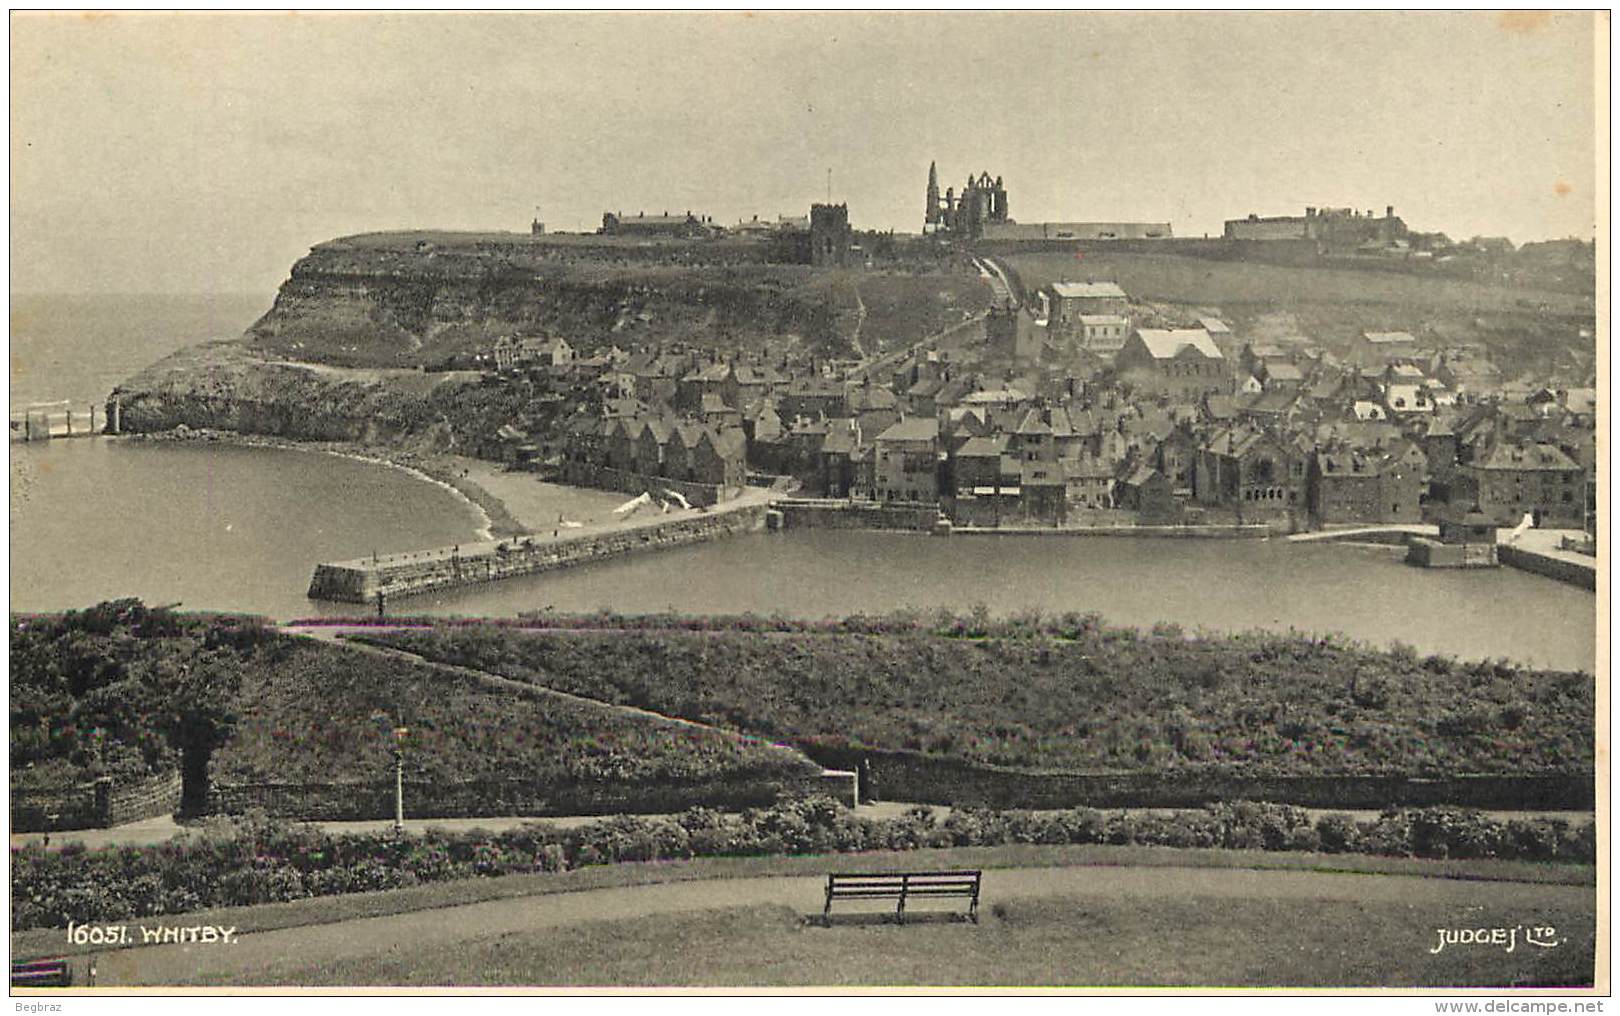 WHITBY     GENERAL VIEW - Whitby